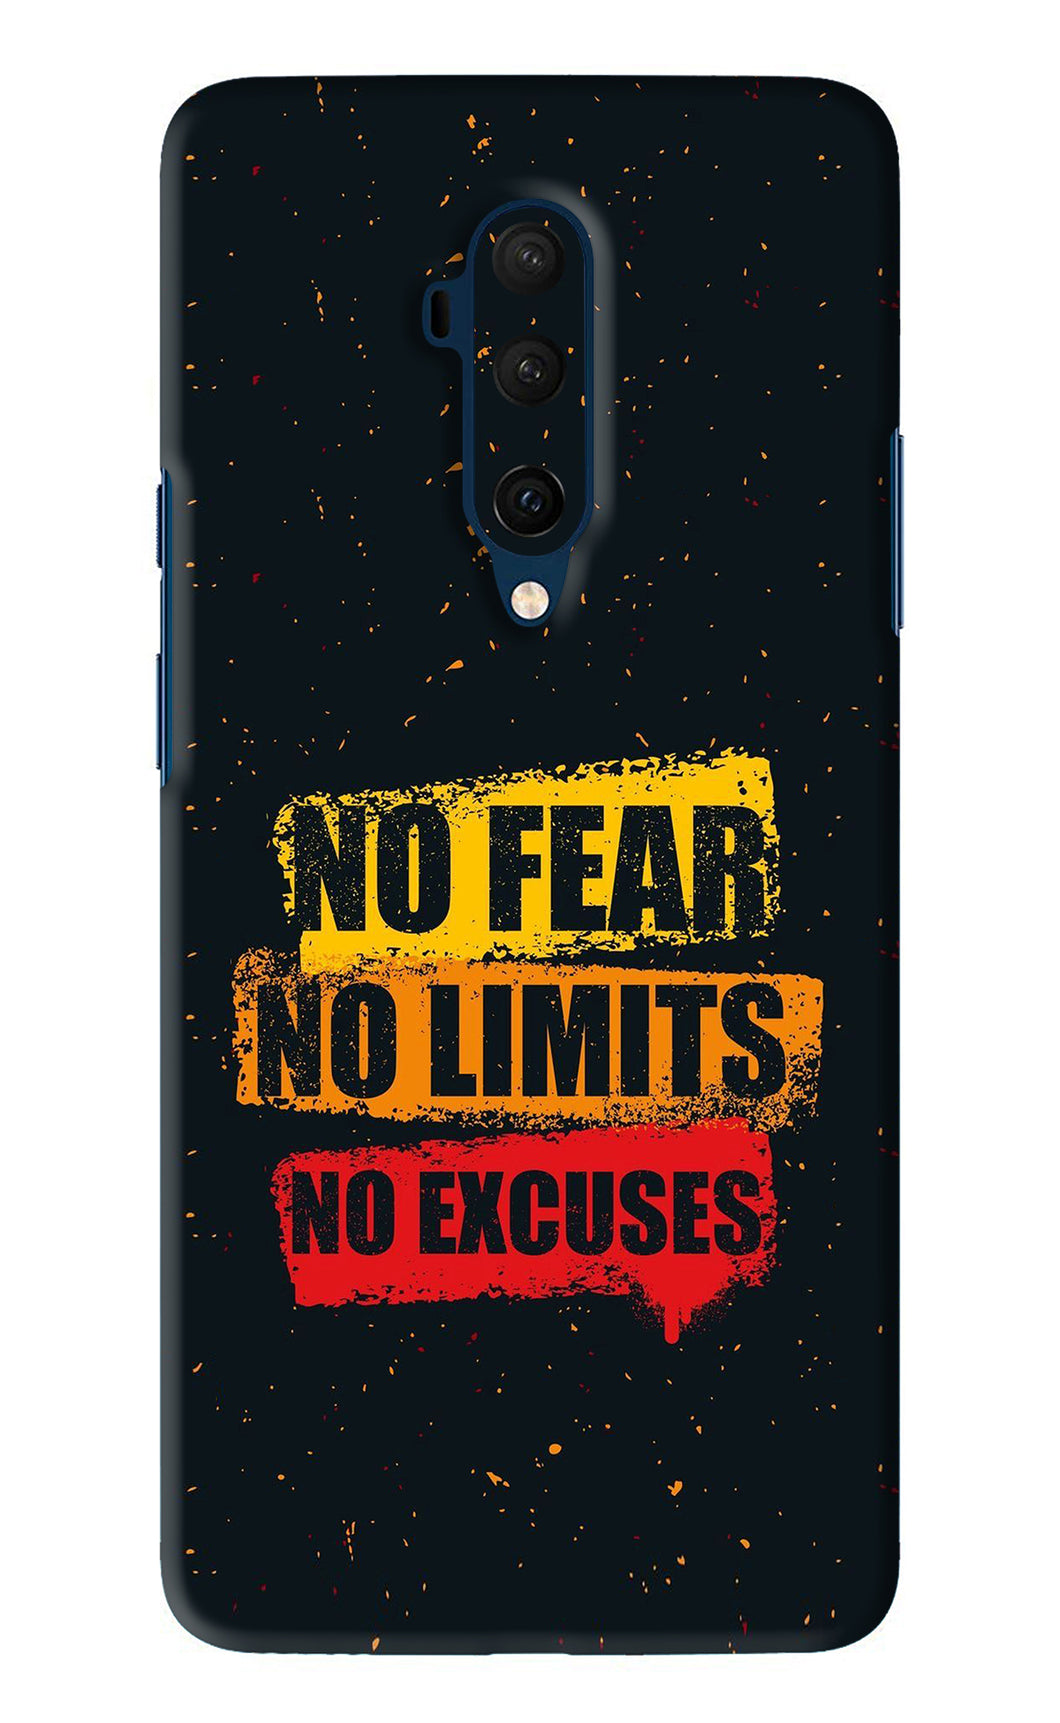 No Fear No Limits No Excuses OnePlus 7T Pro Back Skin Wrap